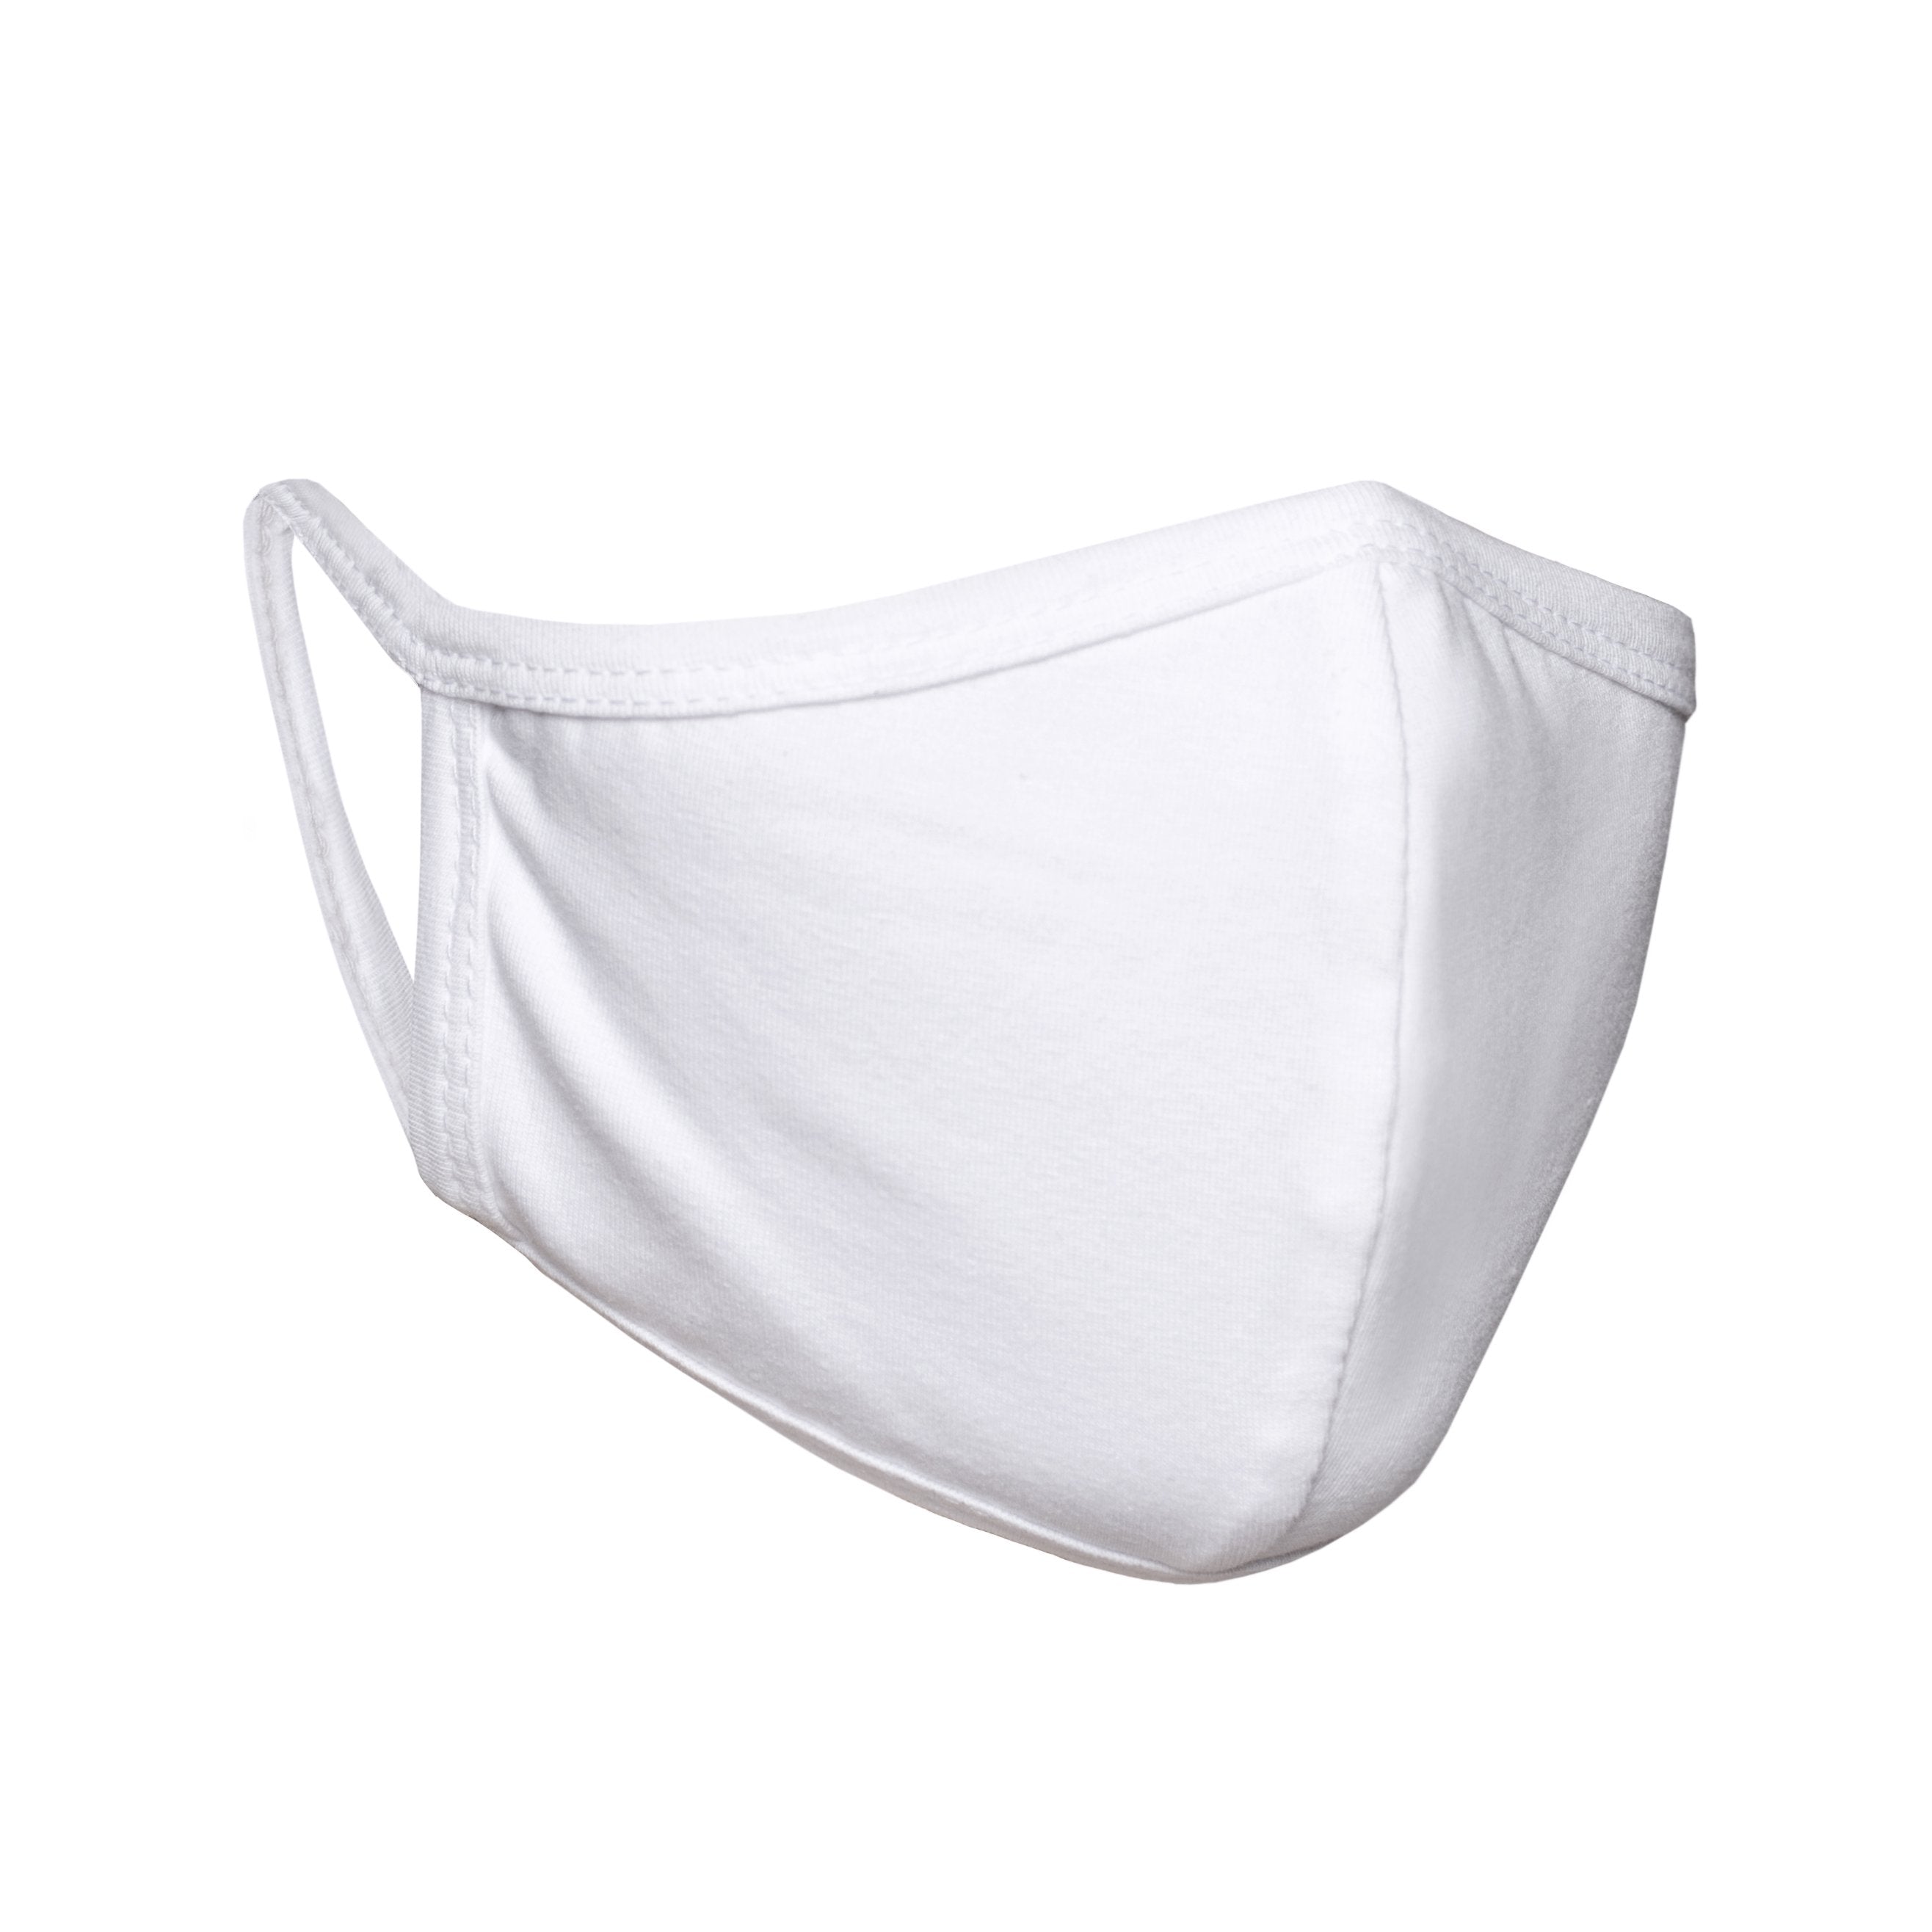 Fashion Mask White - Pack of 5 (FINAL SALE CLOSEOUT) - Tag&Crew